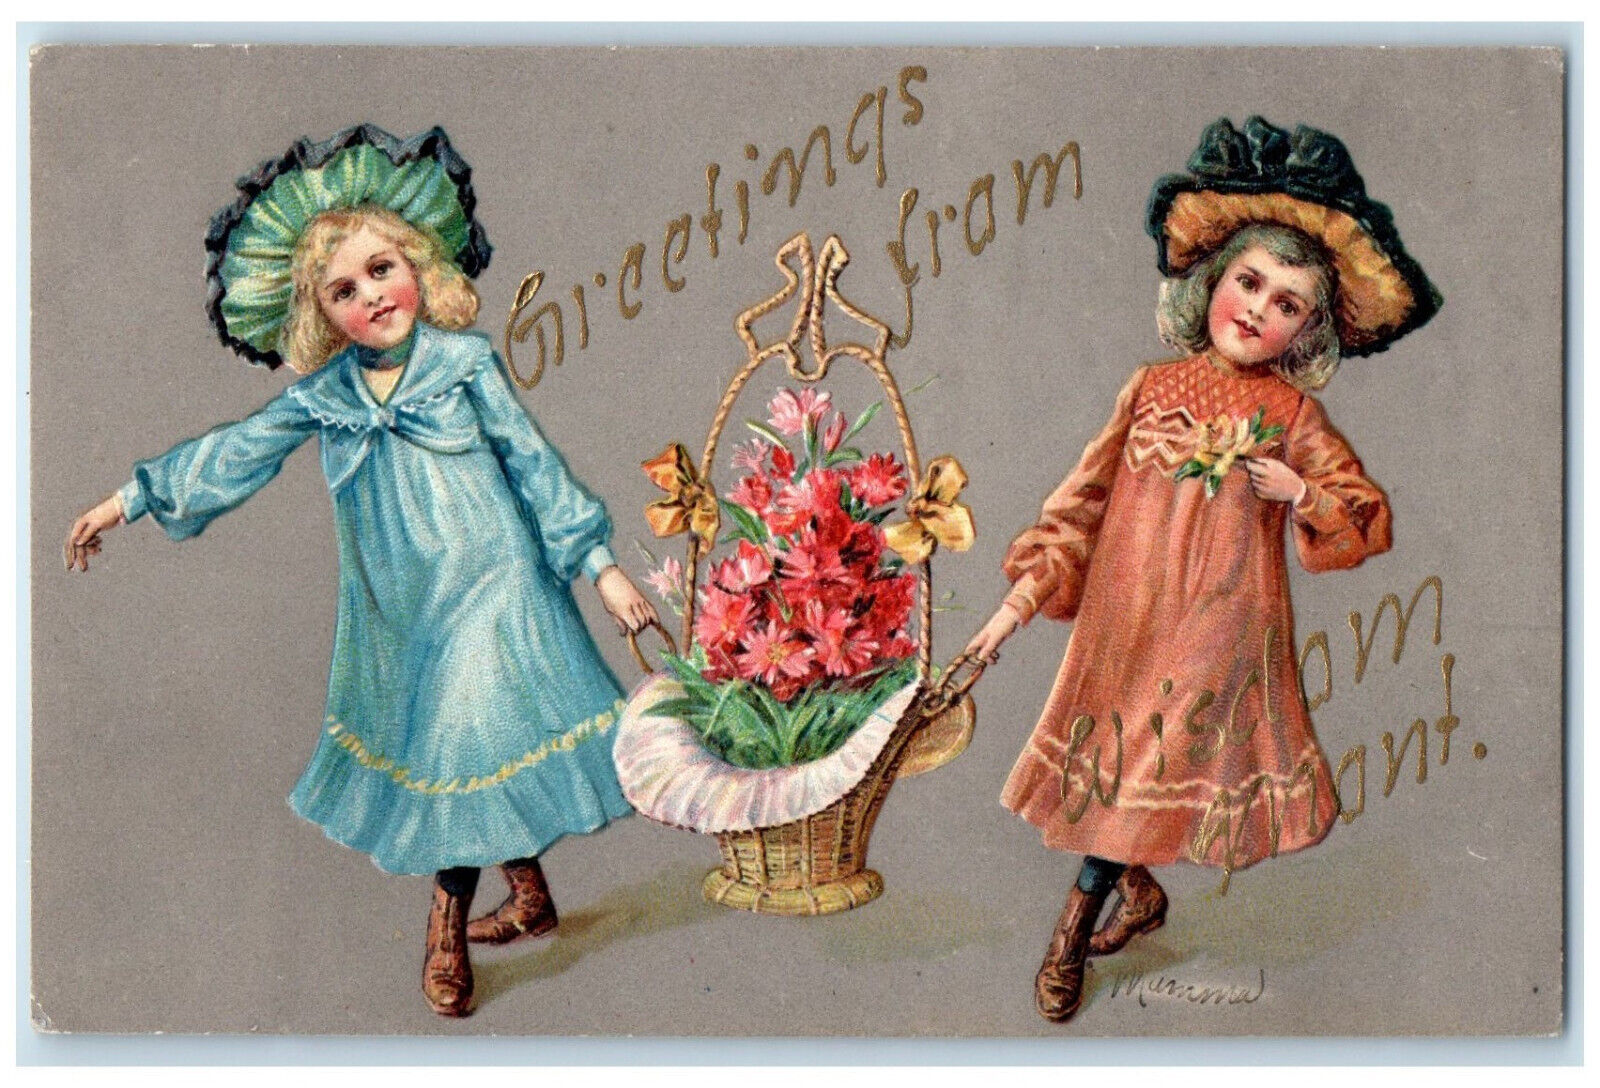 c1905 Two Girls Holding Basket of Flowers Greetings from Wisdom MT Postcard